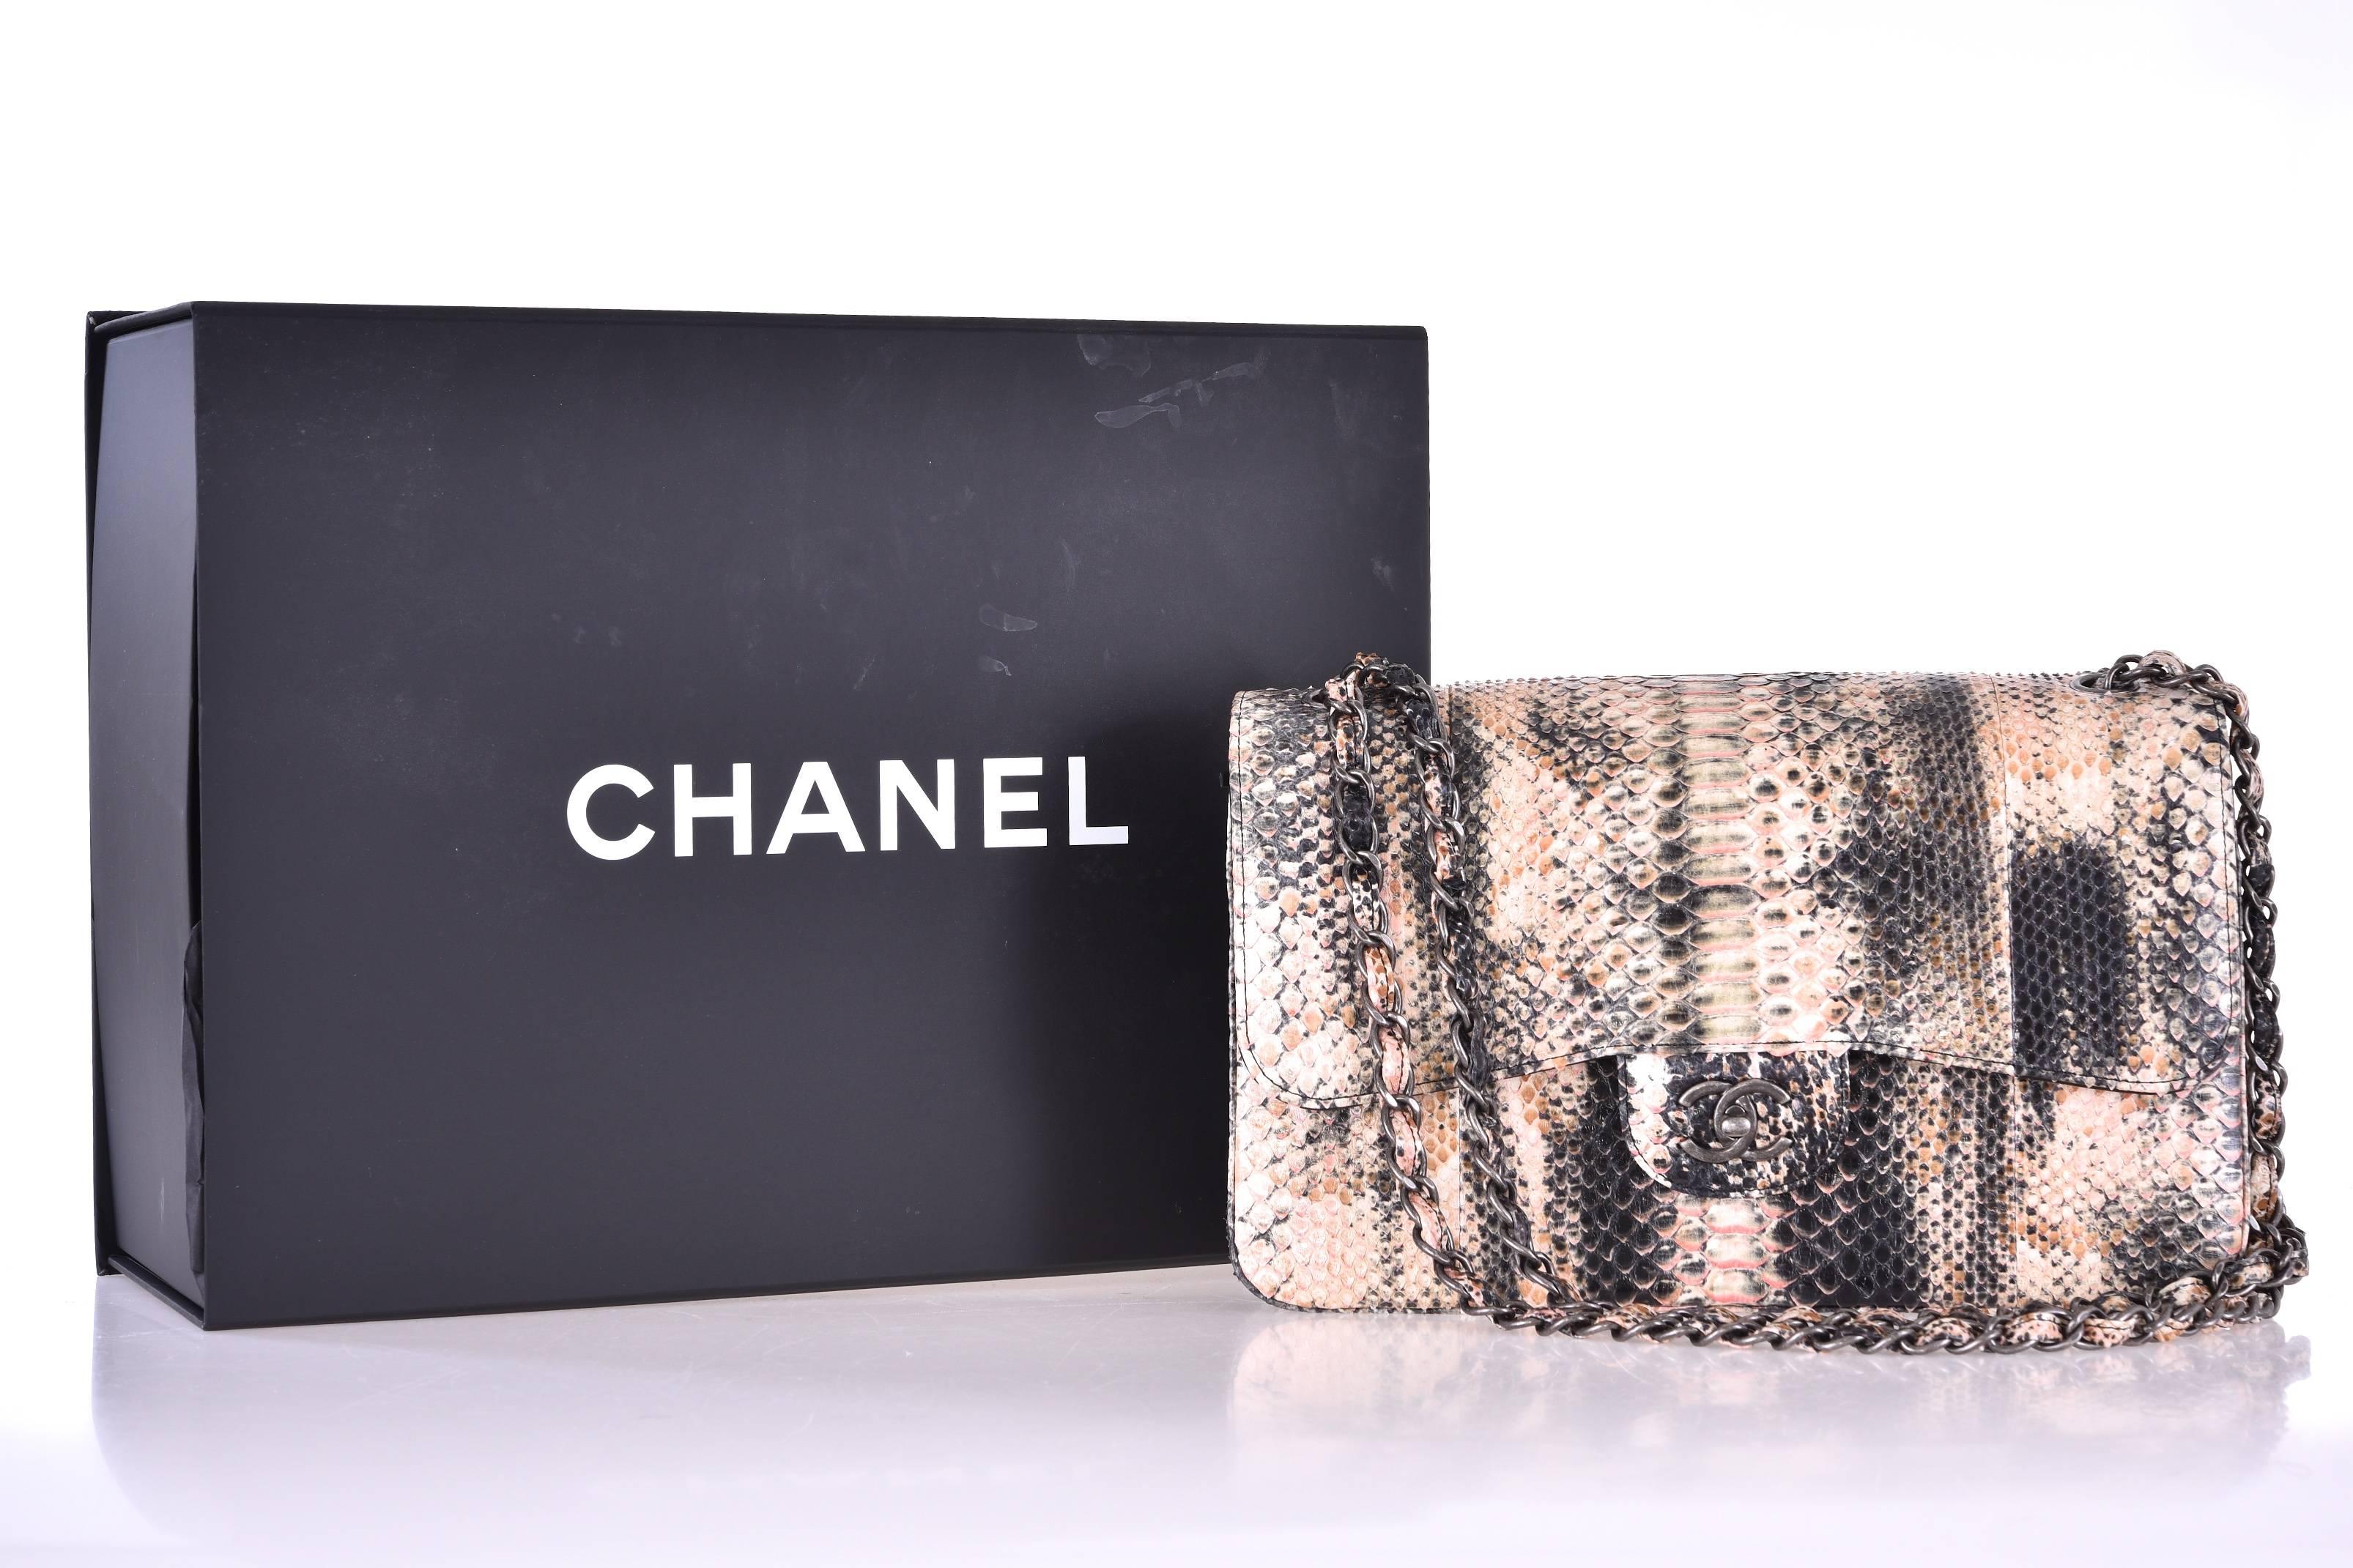 Chanel Multi Color Python Jumbo Classic Double Flap Bag
New condition
12.25